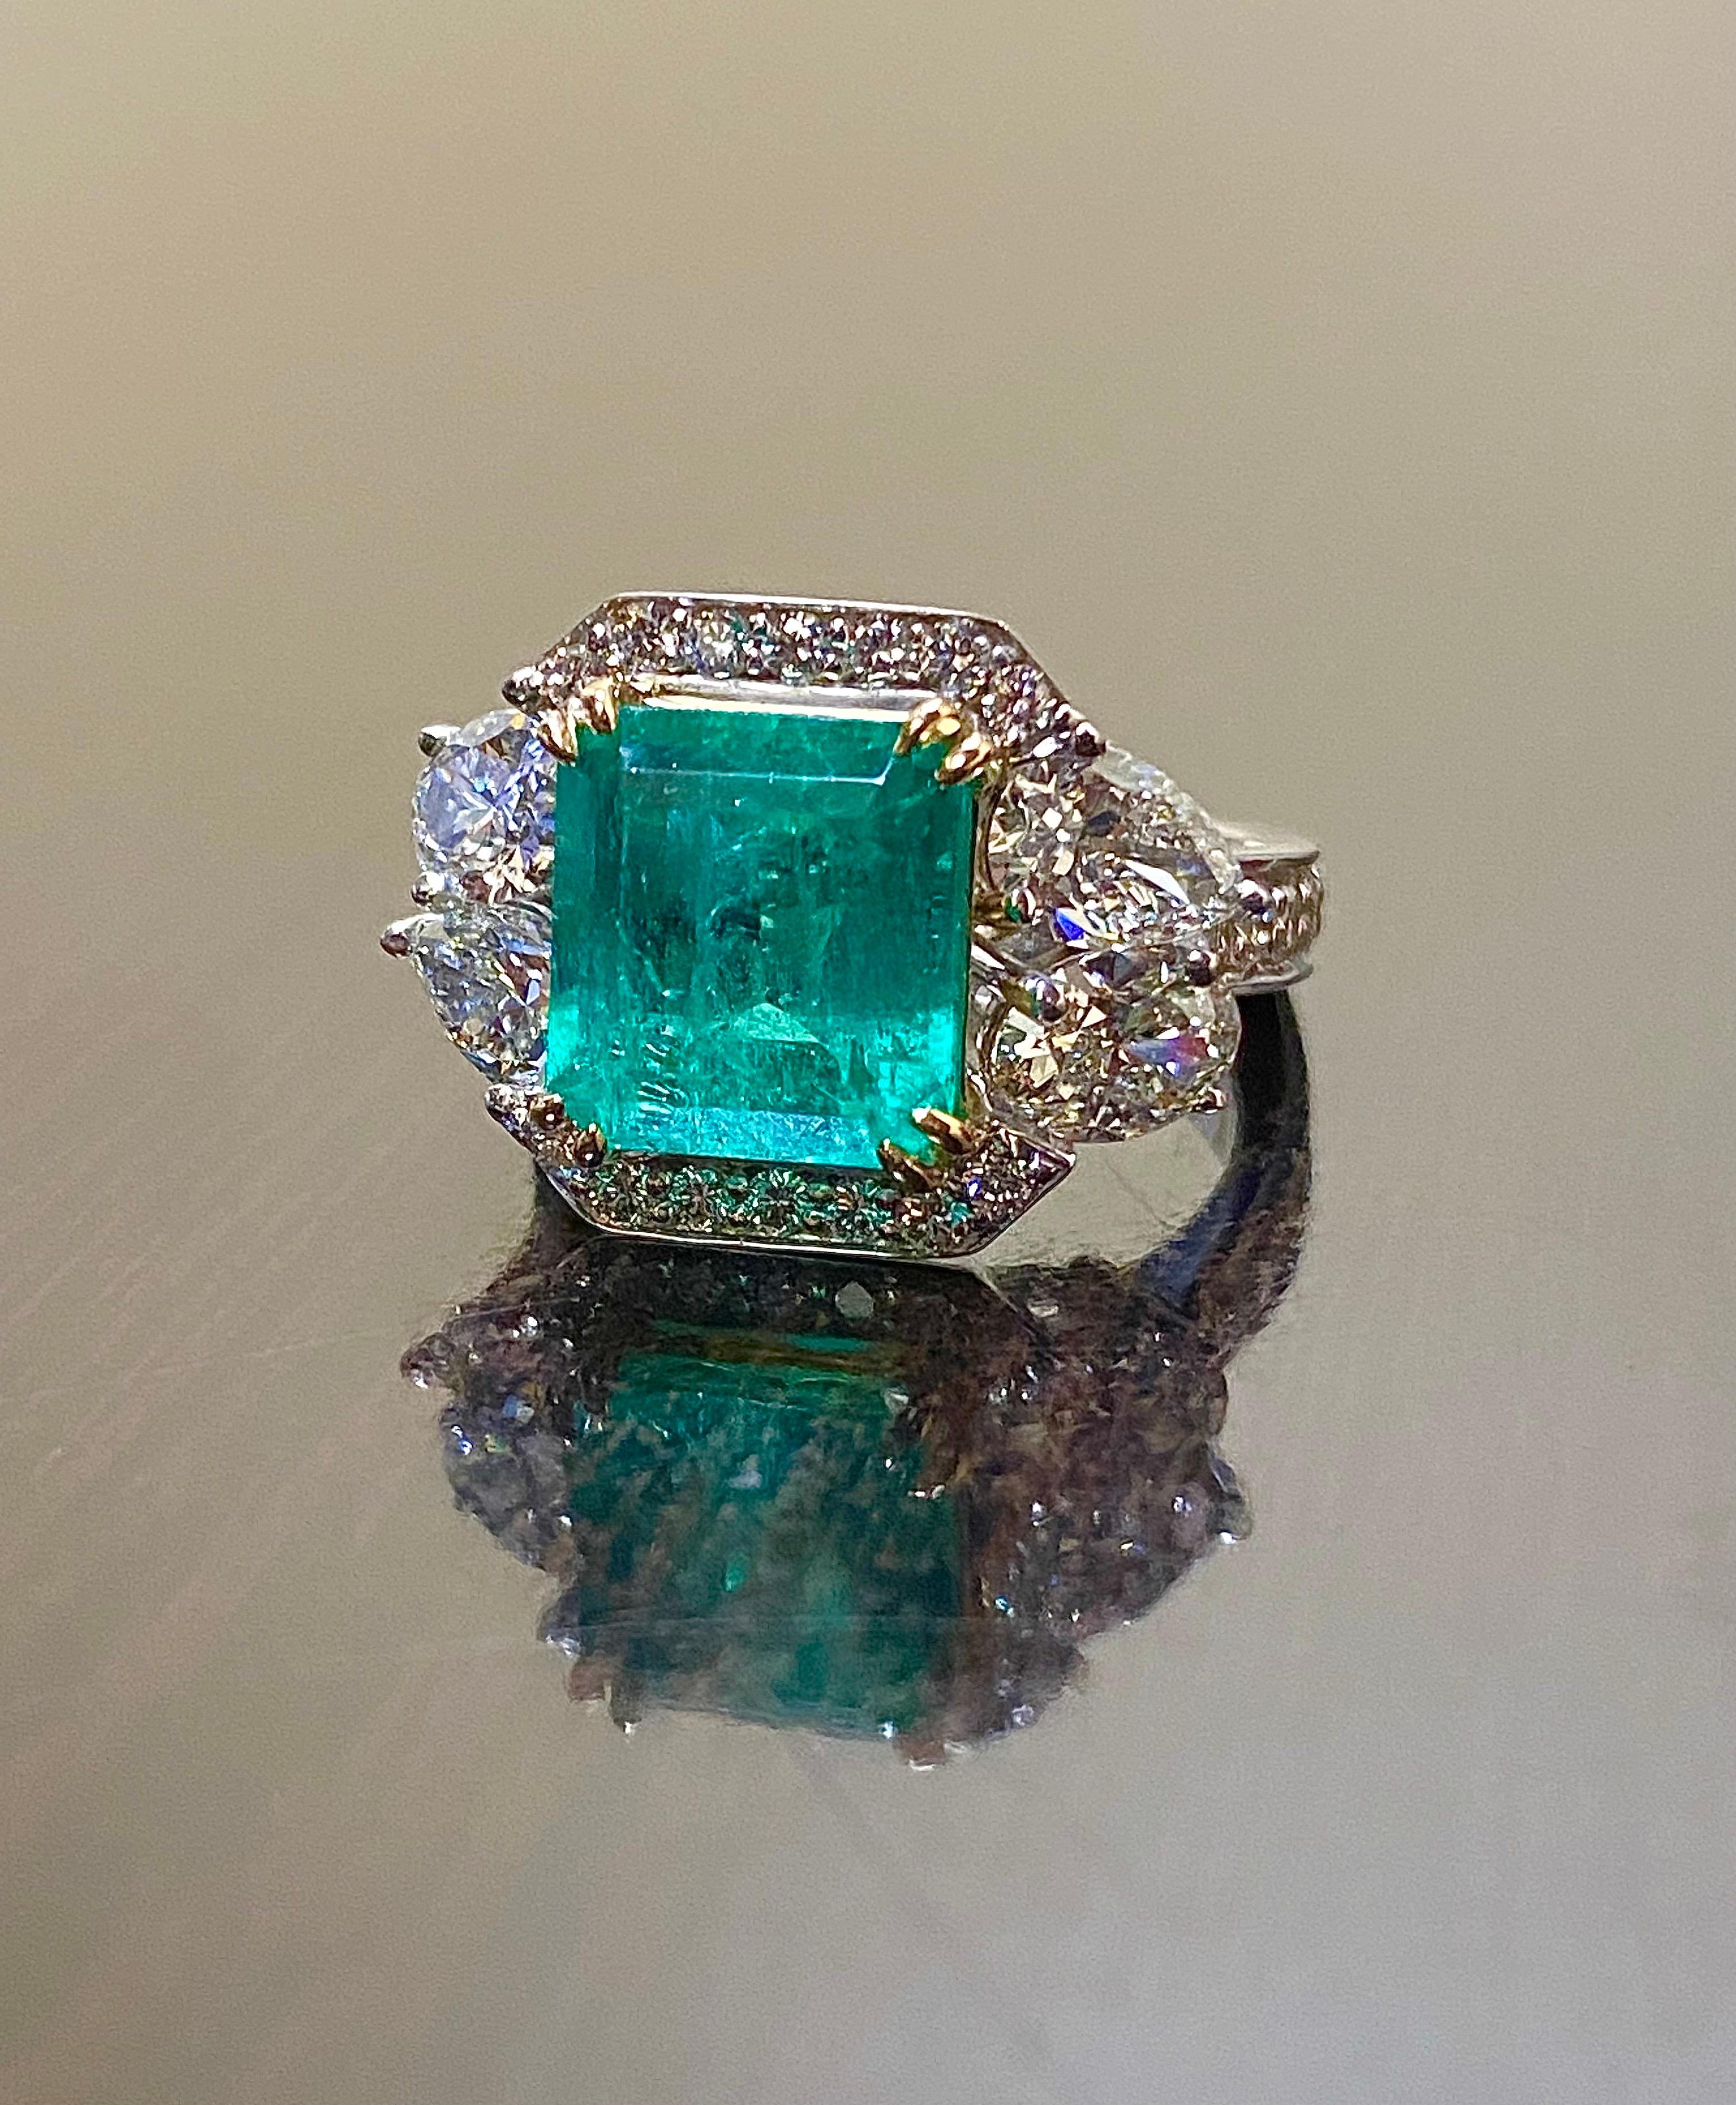 18K White Gold GIA Certified 4.87 Carat Colombian Emerald Diamond Ring For Sale 6